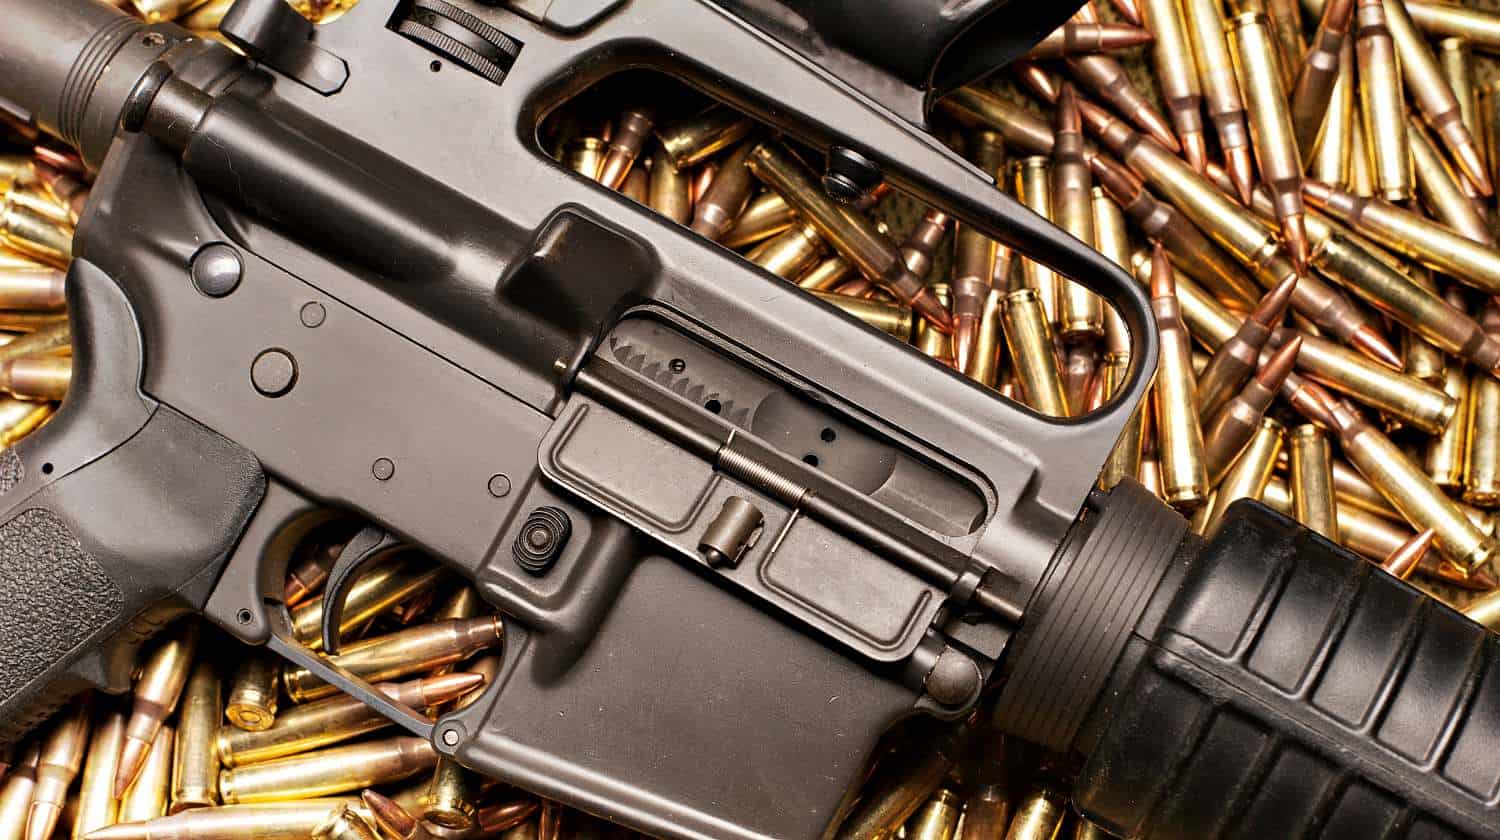 Featured | AR15 with .223 ammunition | AR 15 Lower Receiver And Ammunition | Basics Of The AR-15 Part 2